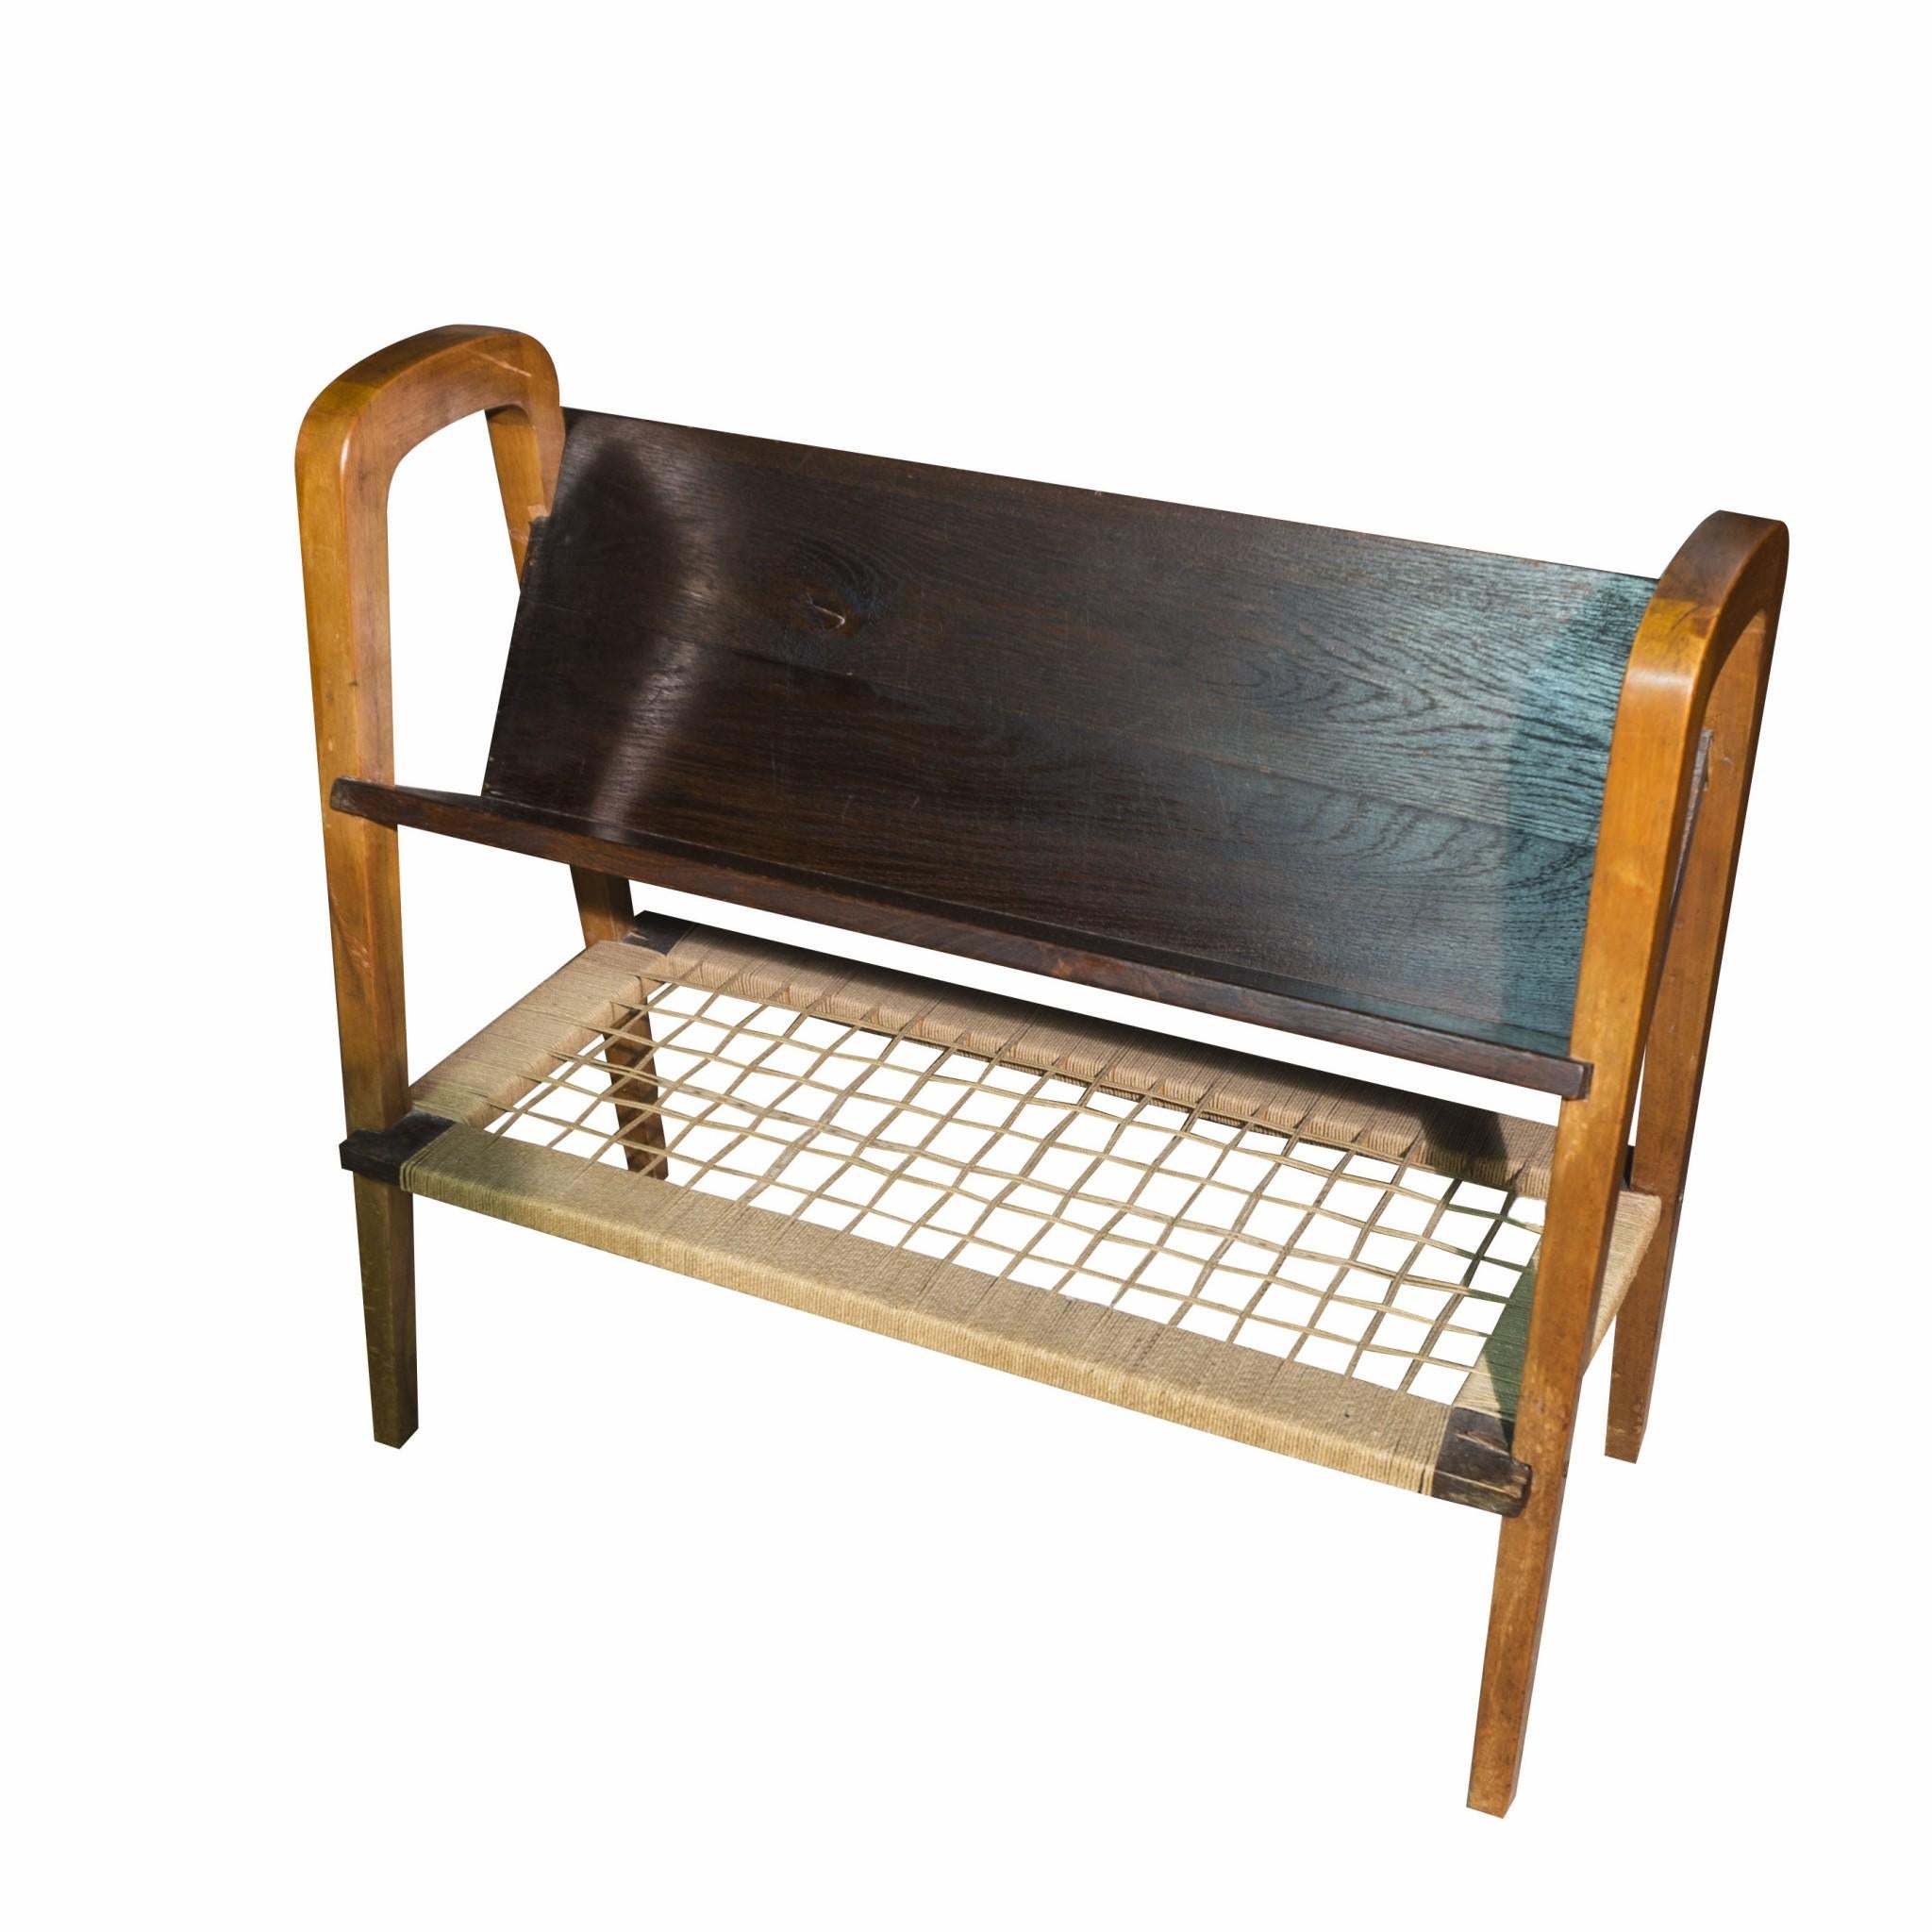 Lovely wooden magazine stand or rack, dating to the 1940s. Solid wood, intertwined bottom part

Attribute to Ladislav Bartonicek or circle, “Krásná Jizba-Druzstevni prace, Praha(Prague)”. In good vintage condition, traces of wear and tear